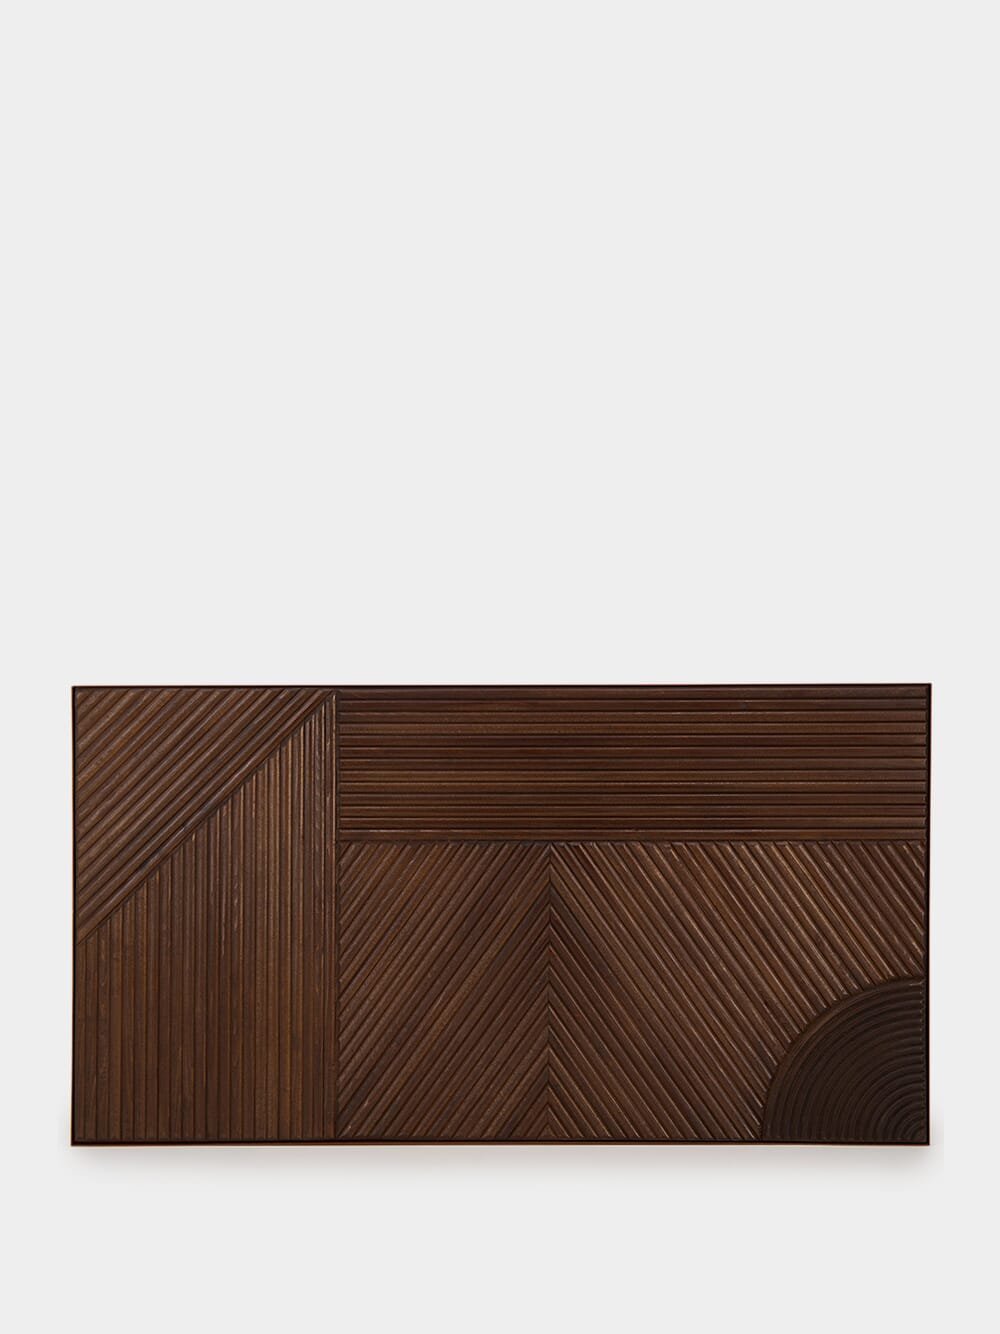 HonoréPaloma Brown Rectangular Coffee Table at Fashion Clinic